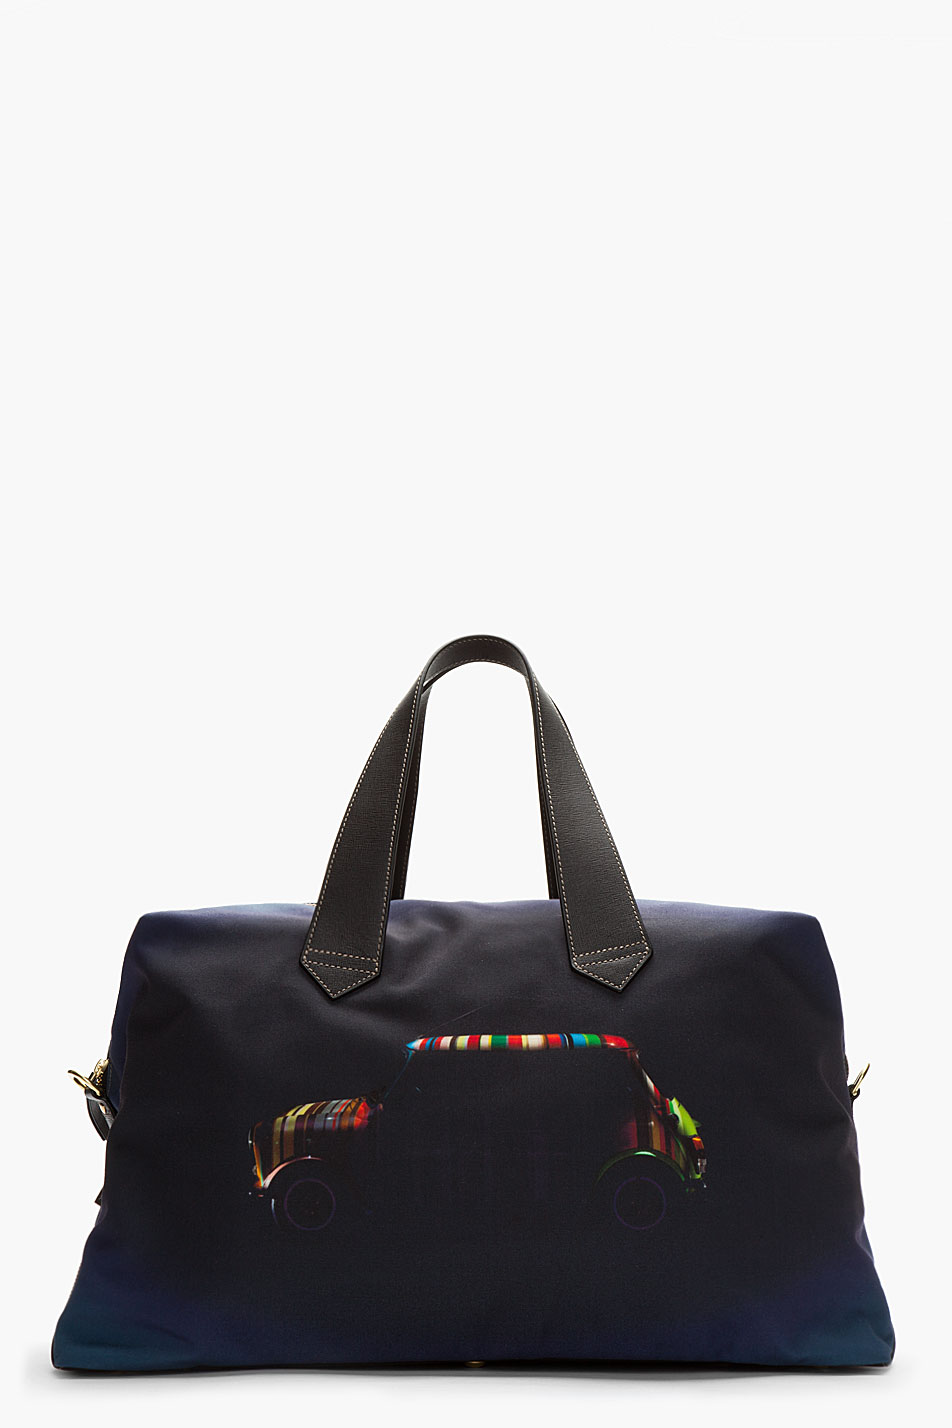 Lyst - Paul Smith Oversize Black Navy Mini Cooper Leather Trimmed Duffle Bag in Blue for Men